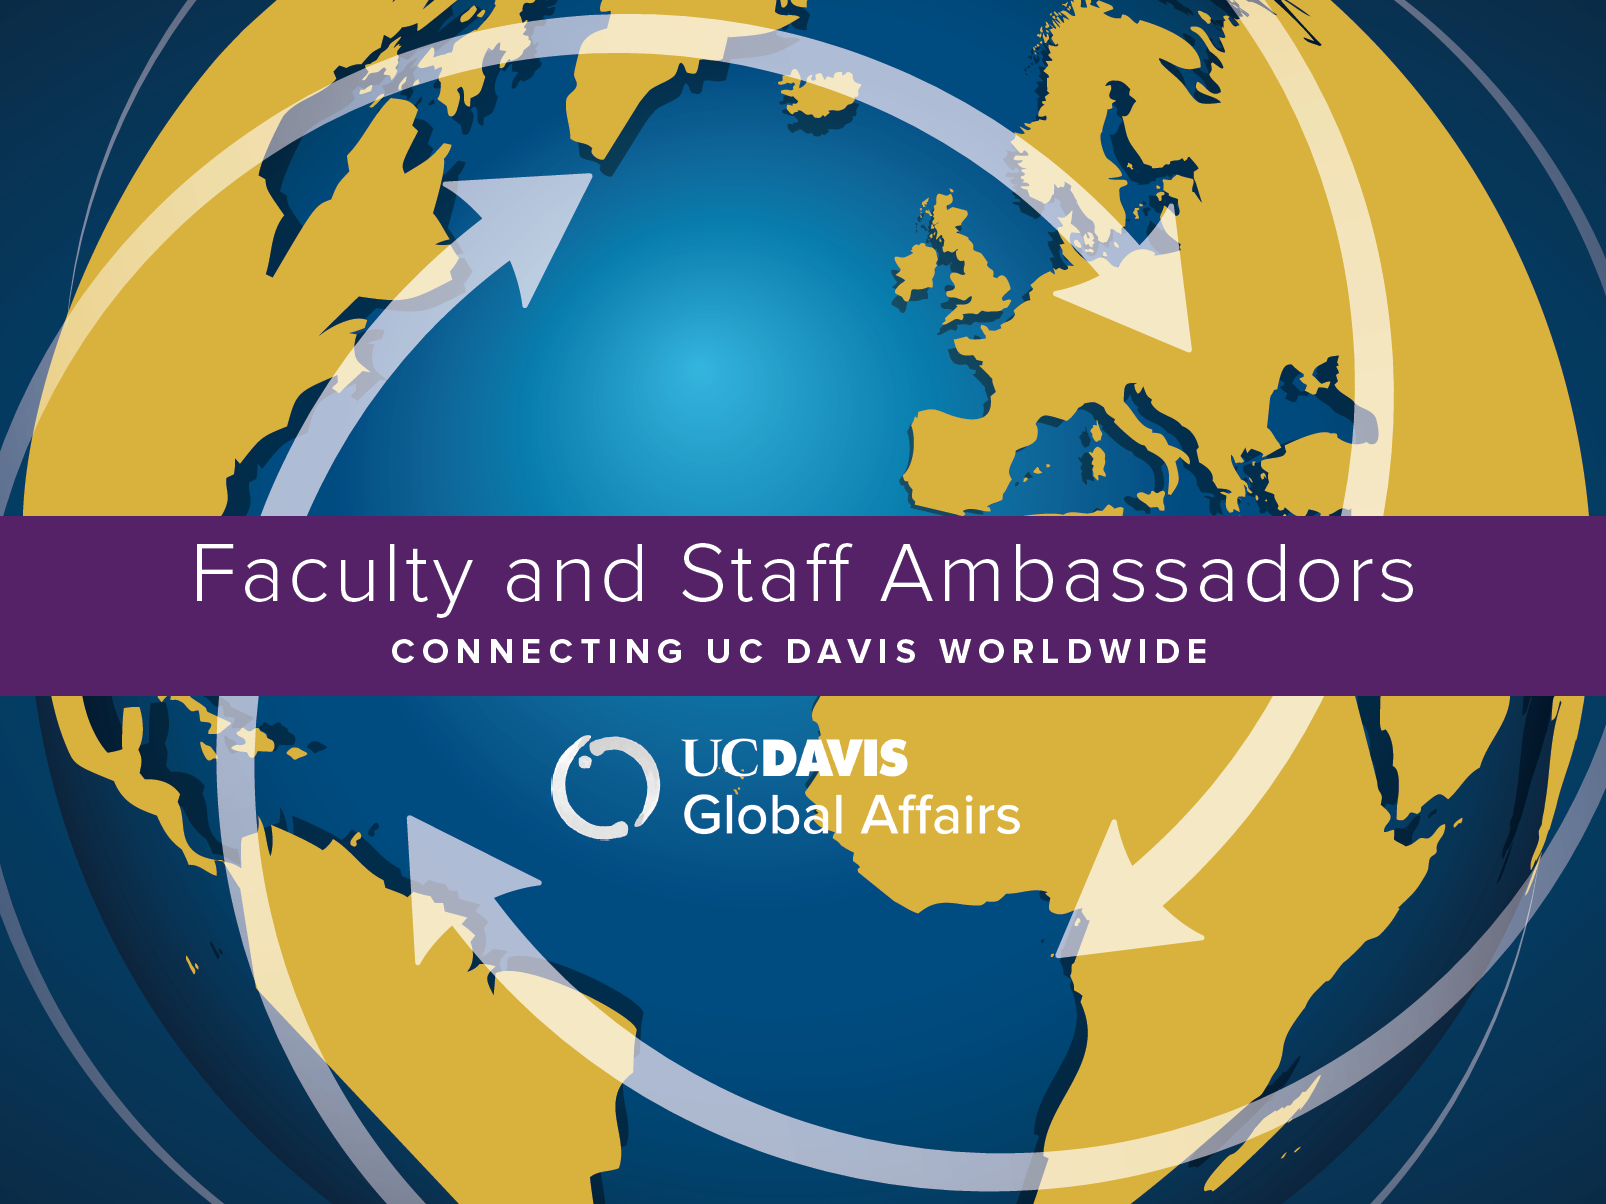 faculty and staff ambassadors - connecting UC Davis worldwide